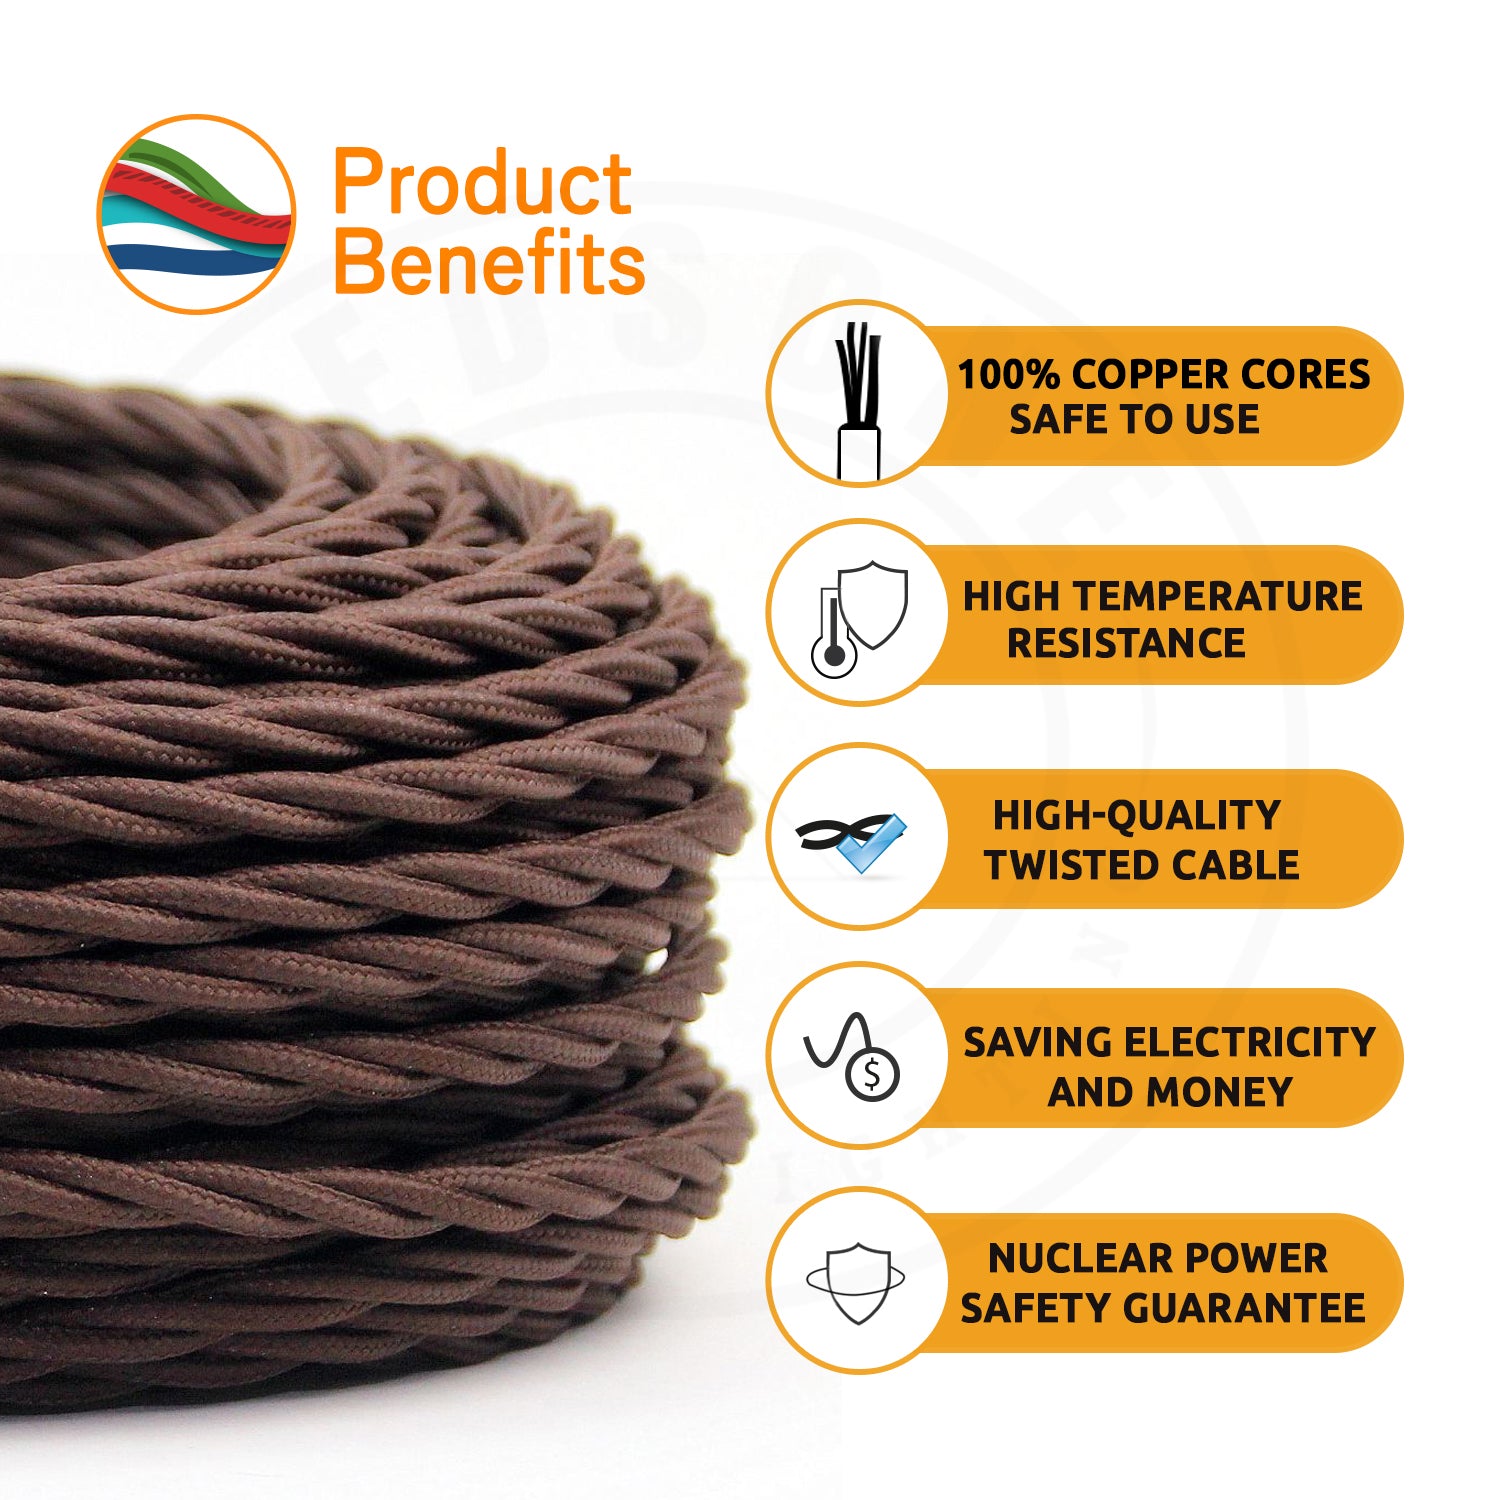 10m 3Core Twisted Electric Cable Covered Light Brown Color Fabric Flex 0.75mm~4834